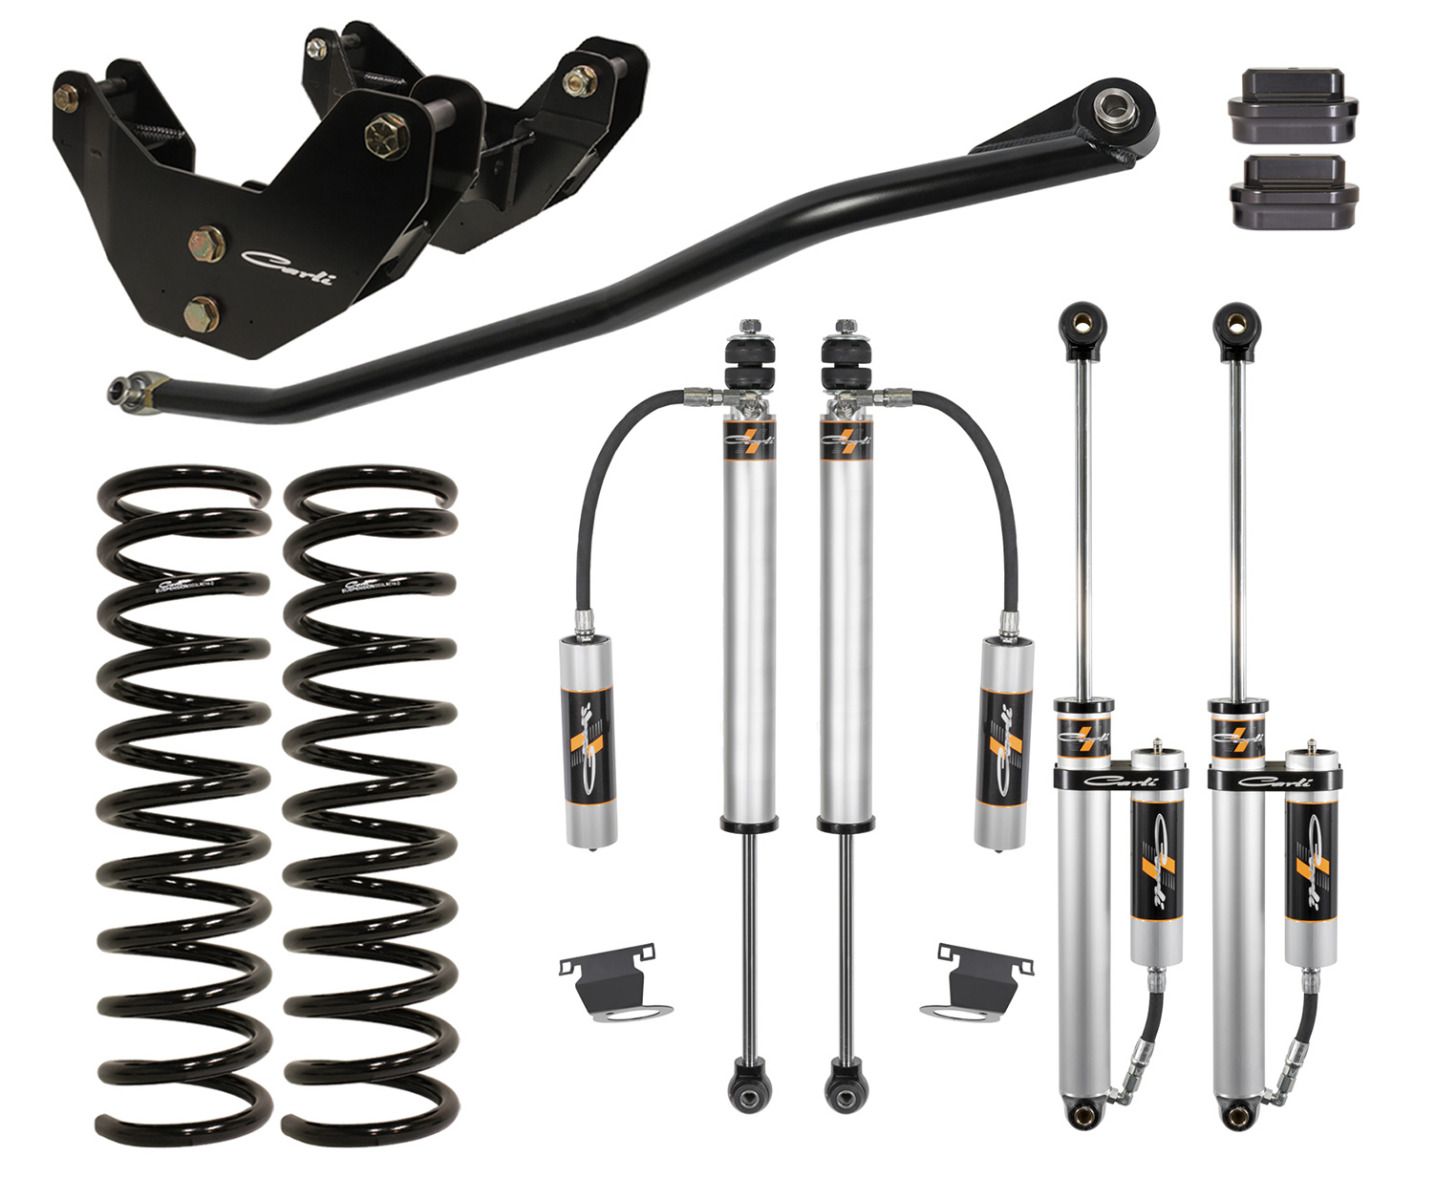 3.5" 2013-2018 Dodge Ram 3500 4wd (w/Diesel Engine) Backcountry Lift System by Carli Suspension